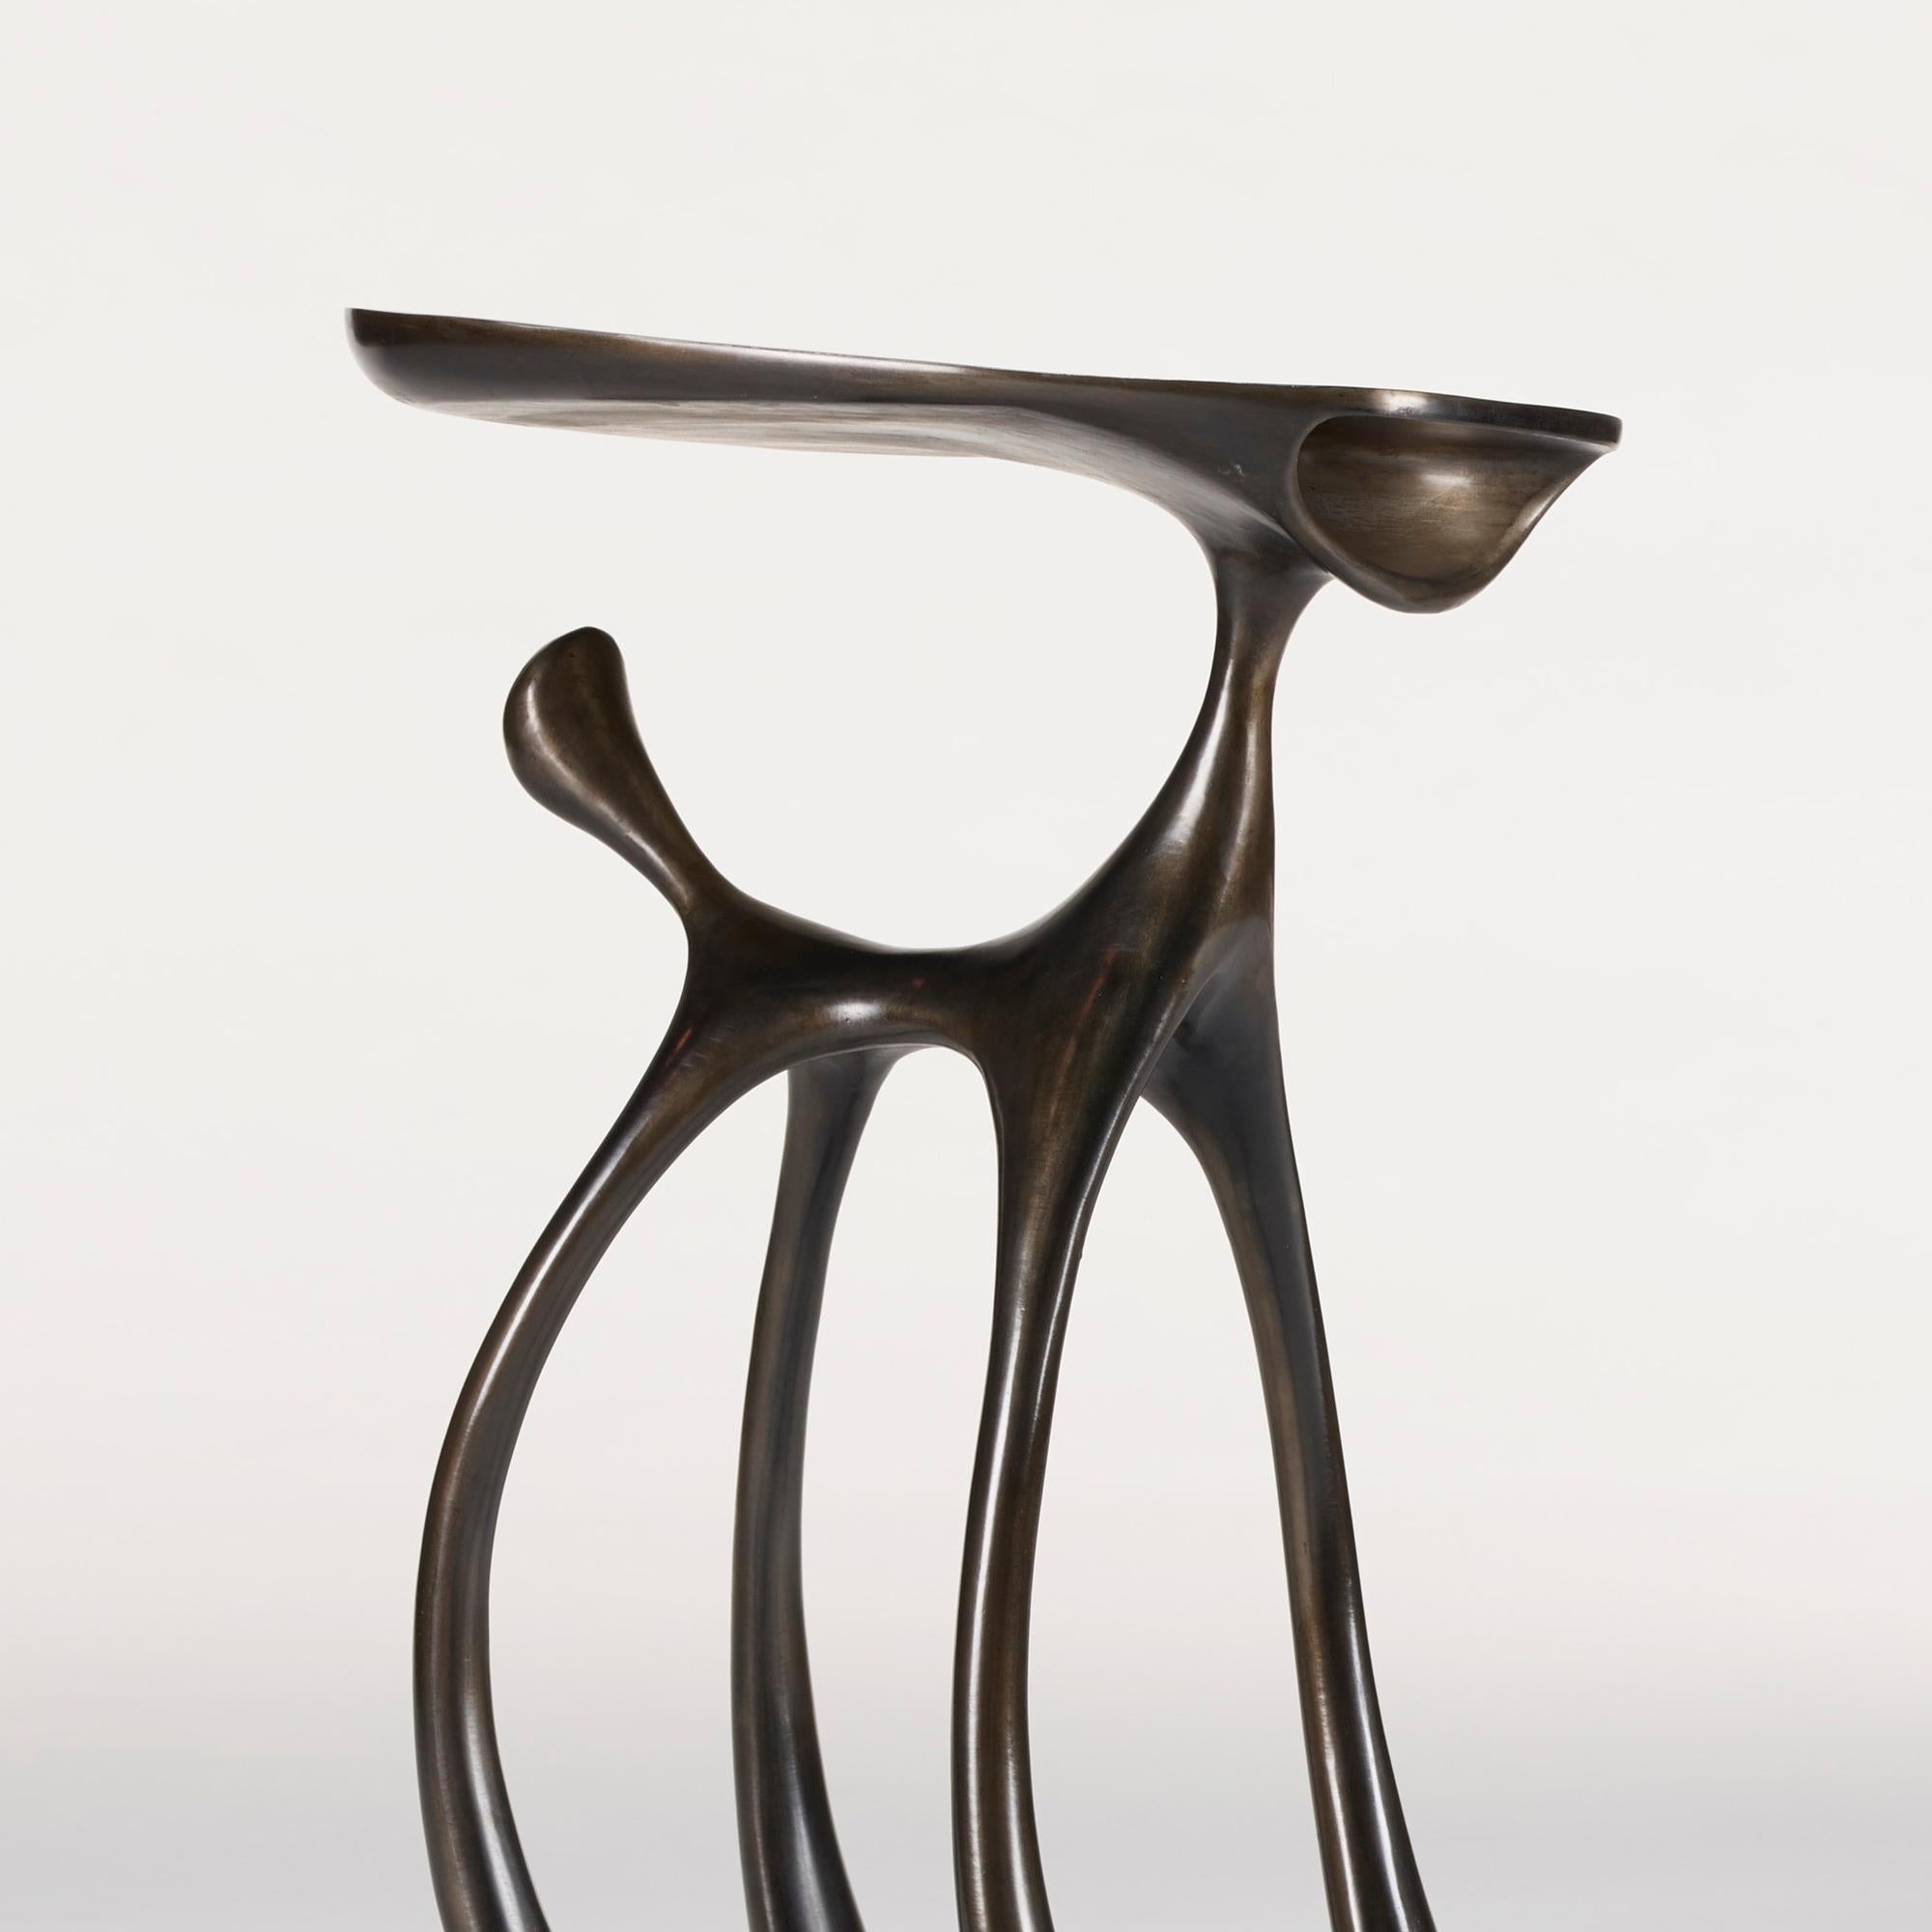 Creature Side Table/Occasional Table, Patinated Cast Aluminum, Jordan Mozer 2008 In New Condition For Sale In Chicago, IL